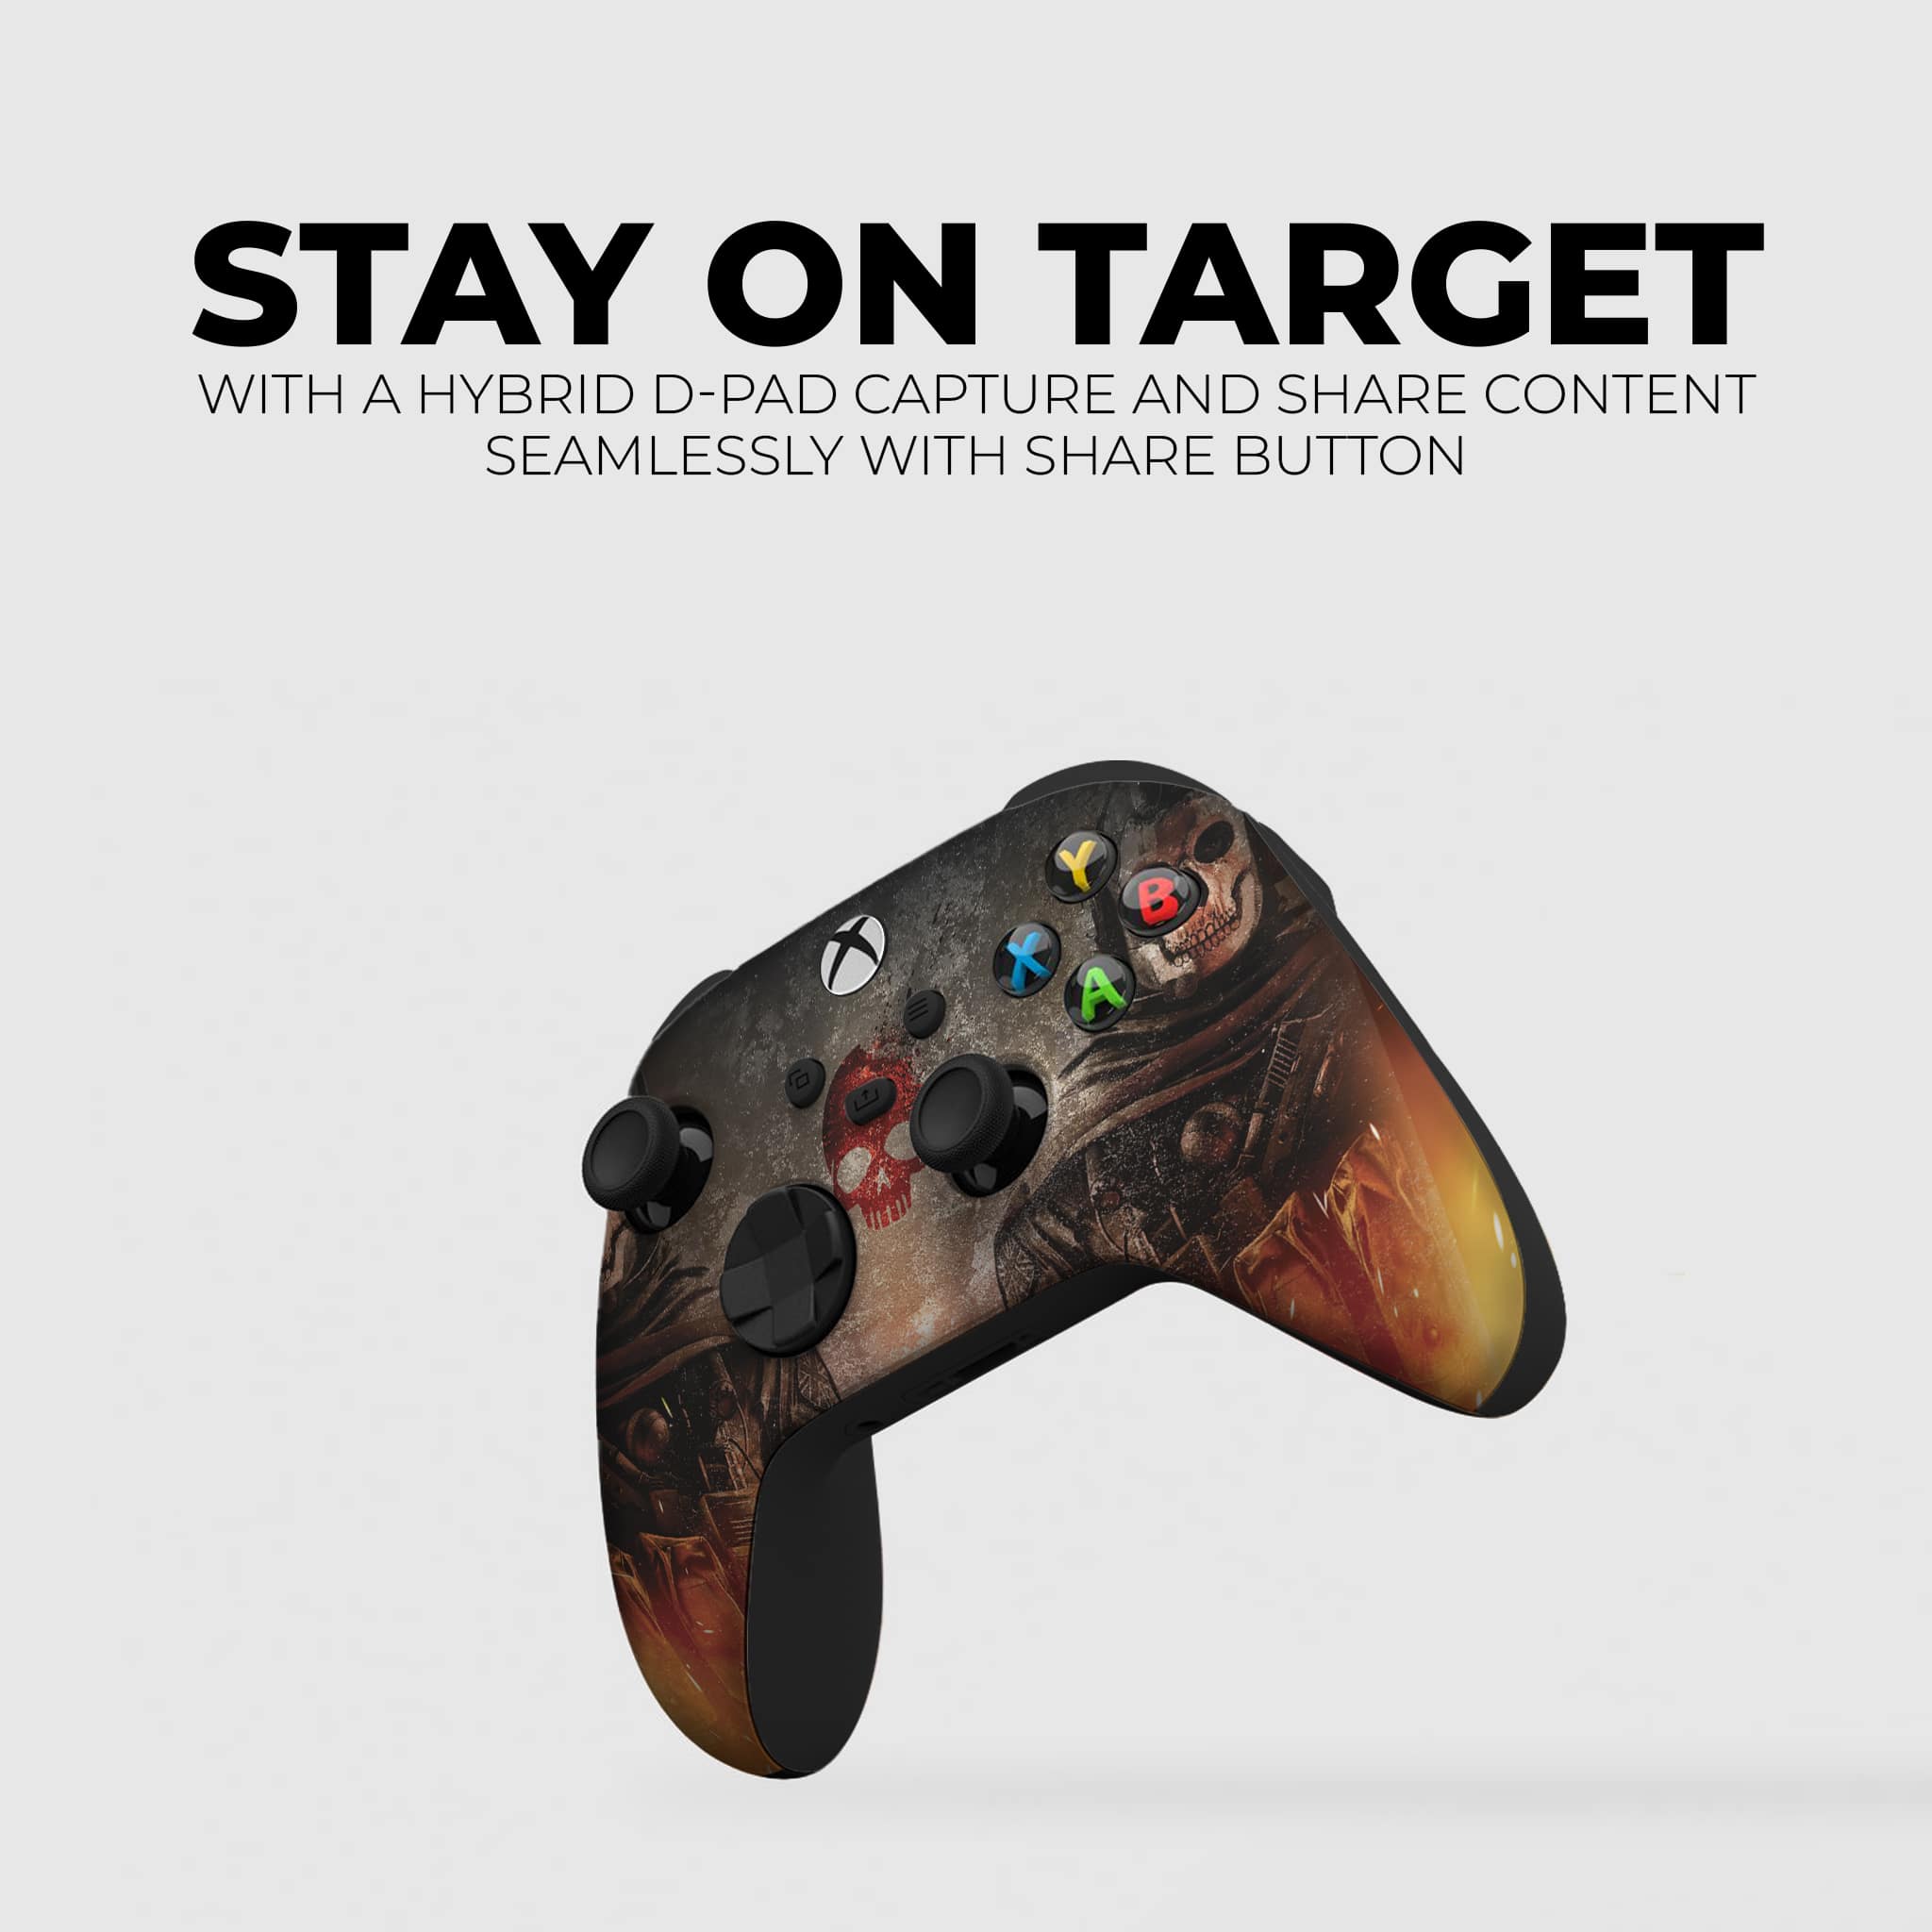 xbox call off duty controller support